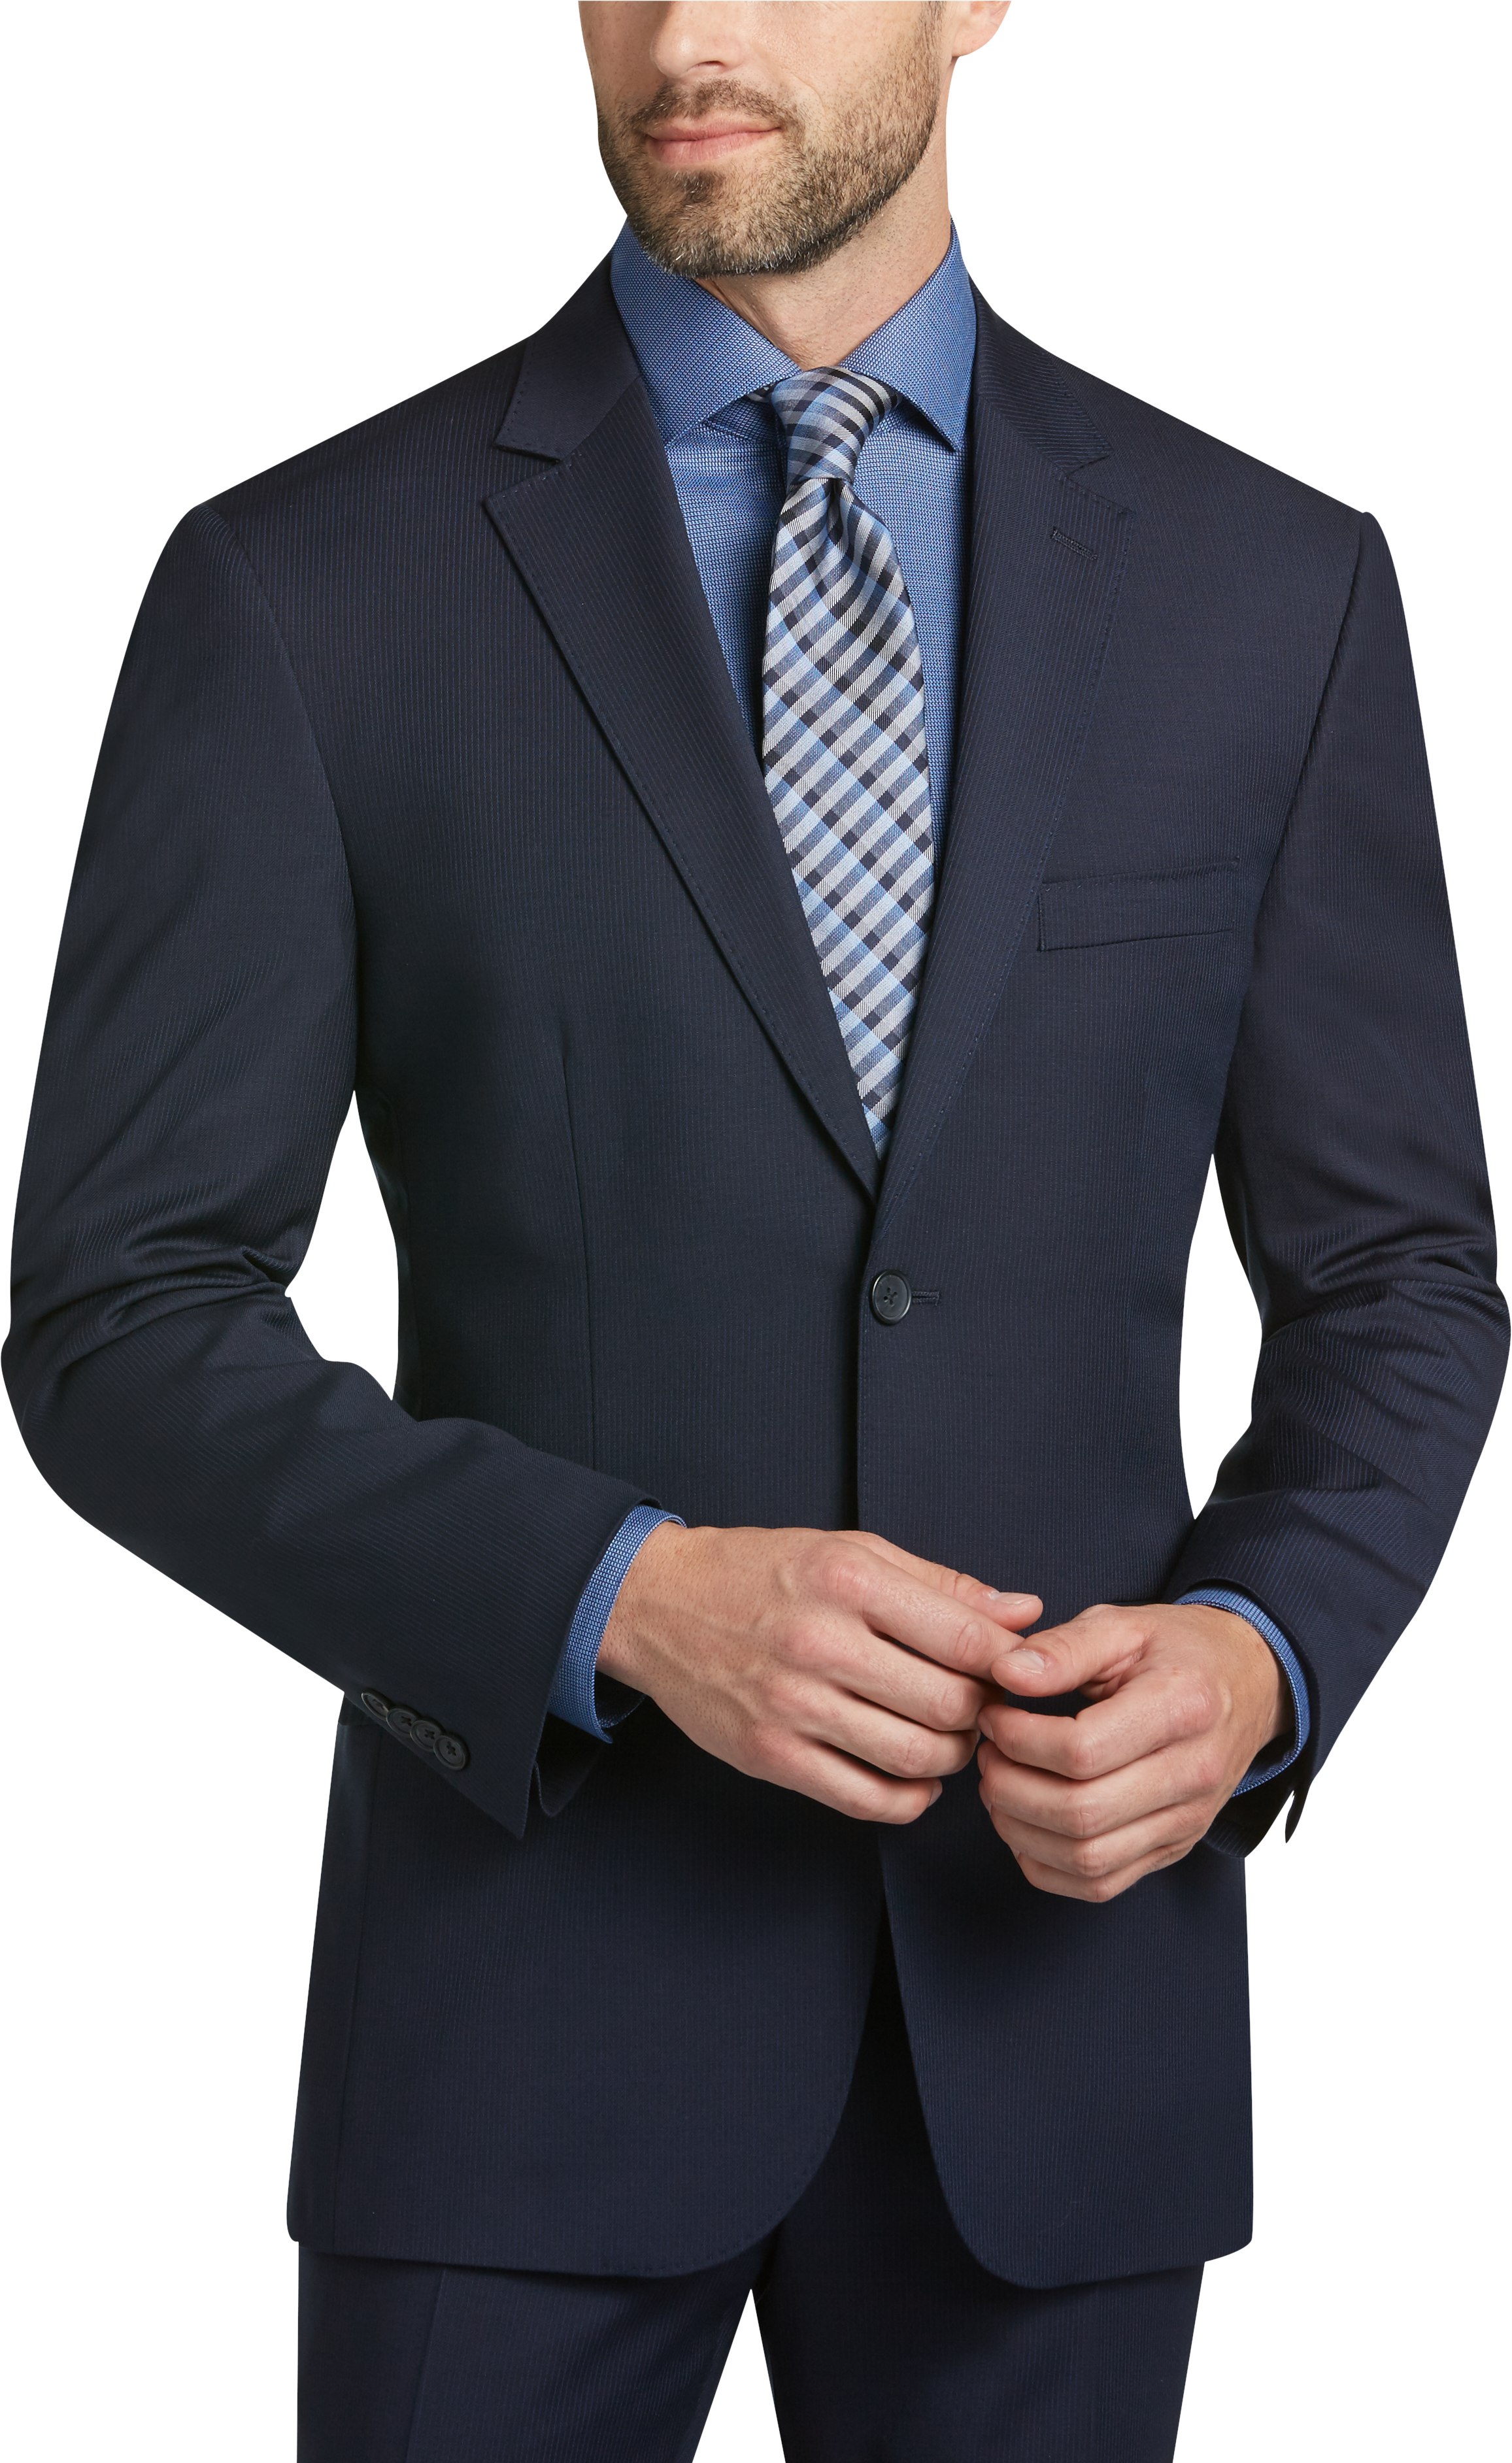 Awearness Kenneth Cole Navy Stripe Slim Fit Suit - Men's The New Blue ...